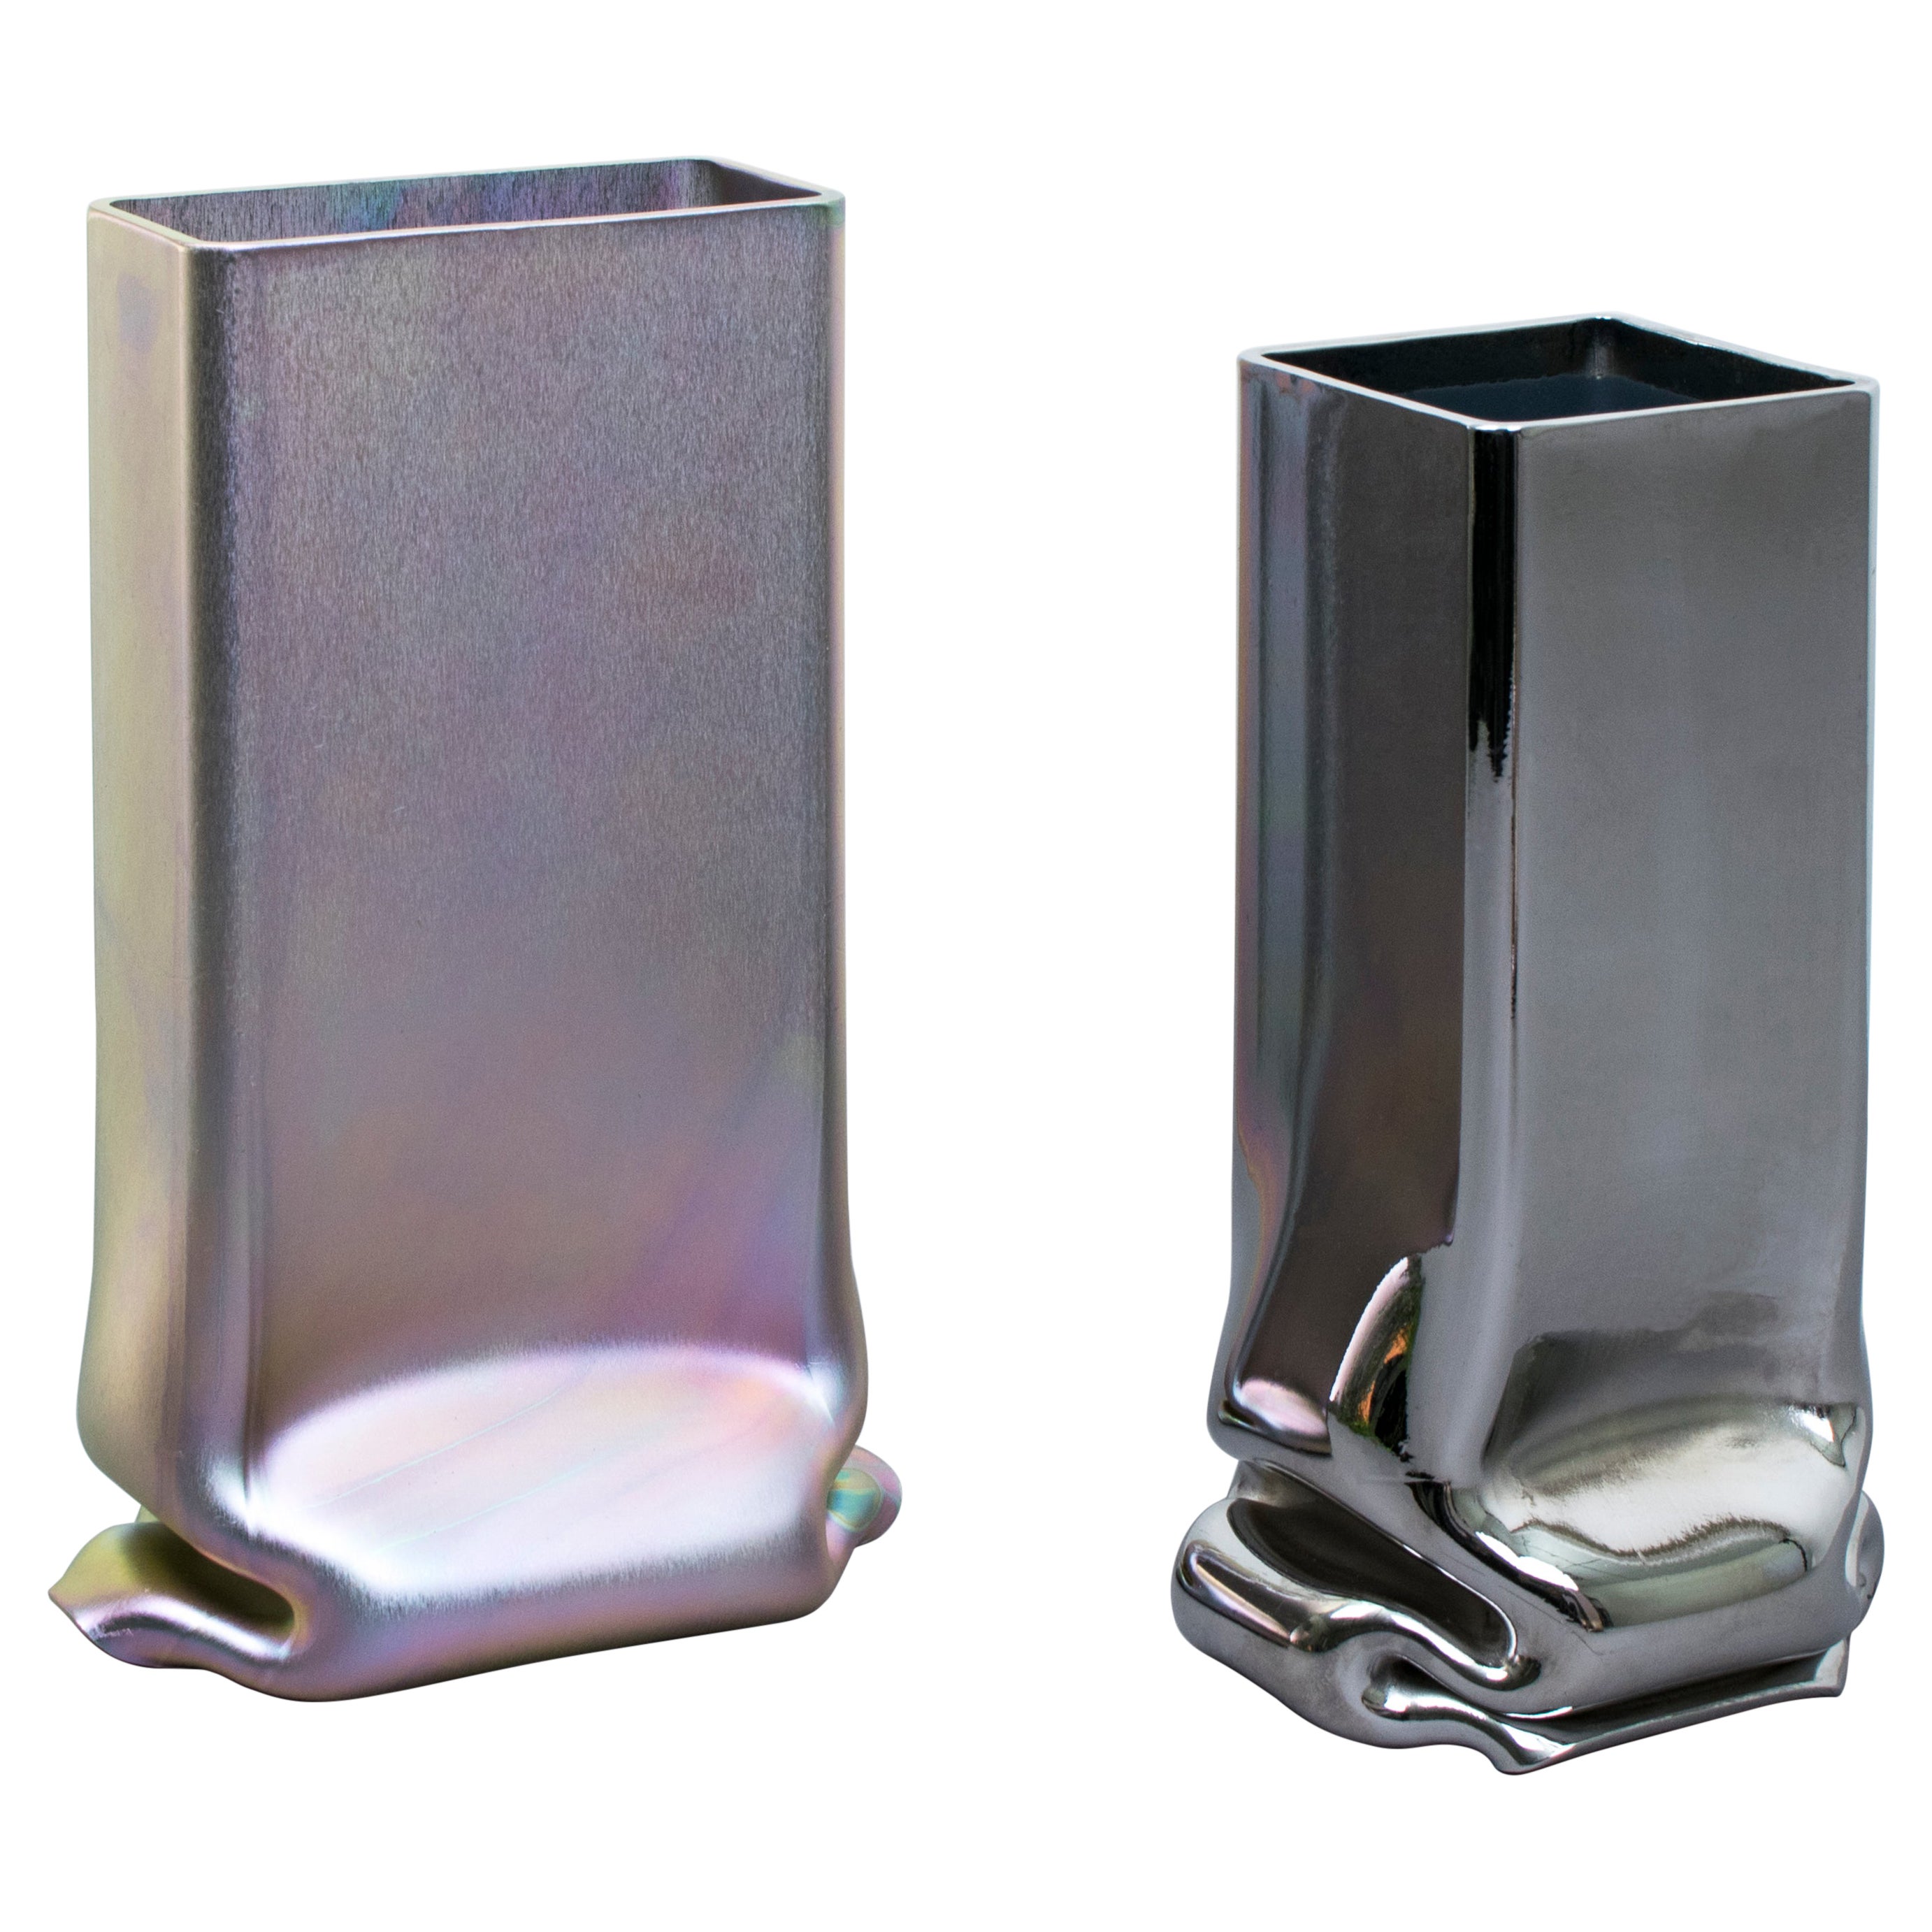 Set of Zinc & Chrome Plated Pressure Vases by Tim Teven For Sale